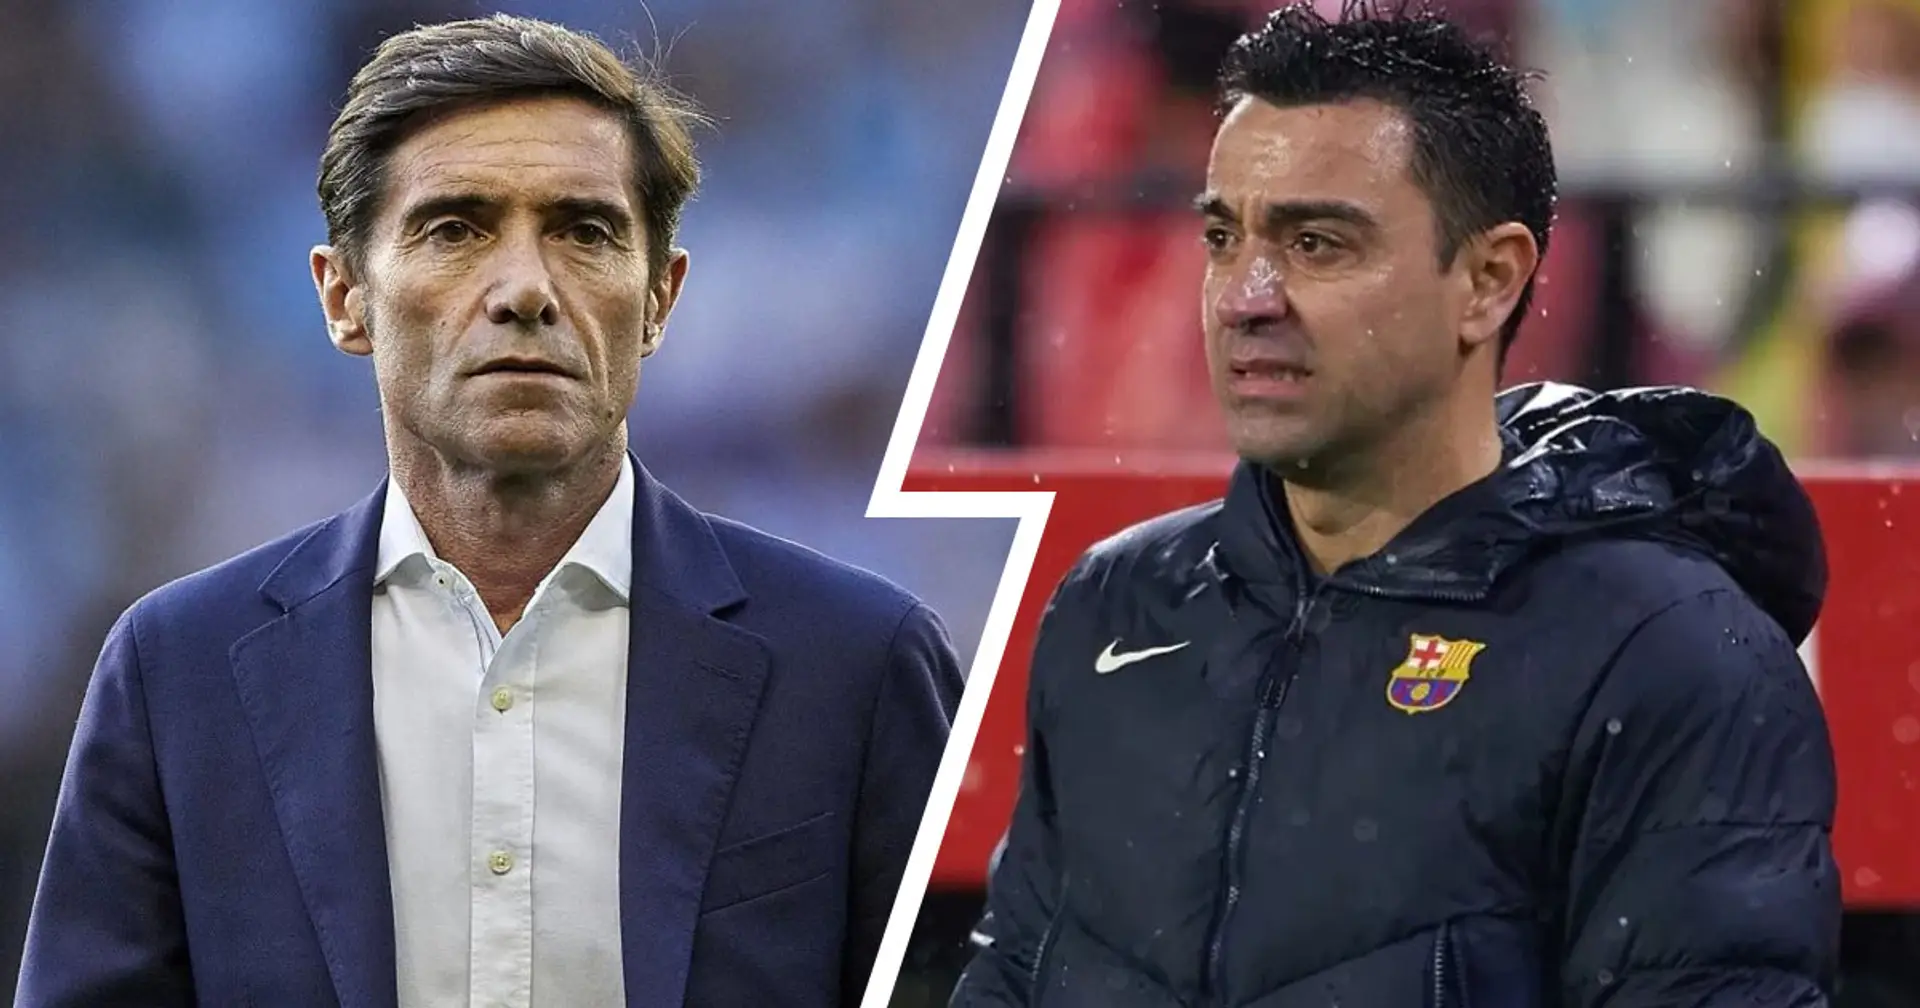 'They're more intense': Athletic Bilbao boss Marcelino details Barca's changes under Xavi